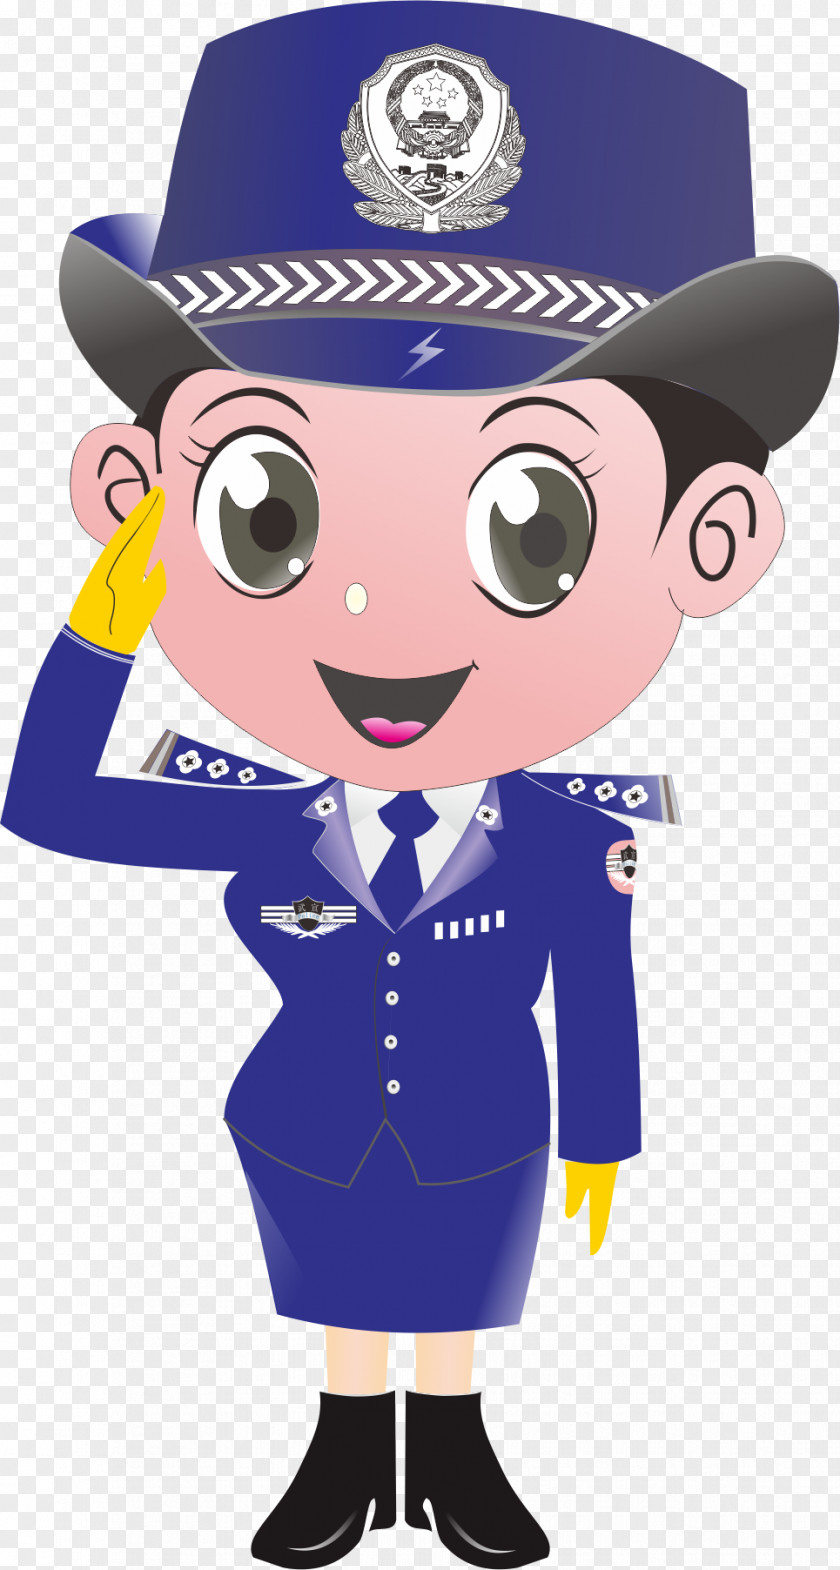 Female Police Elements Officer Cartoon PNG